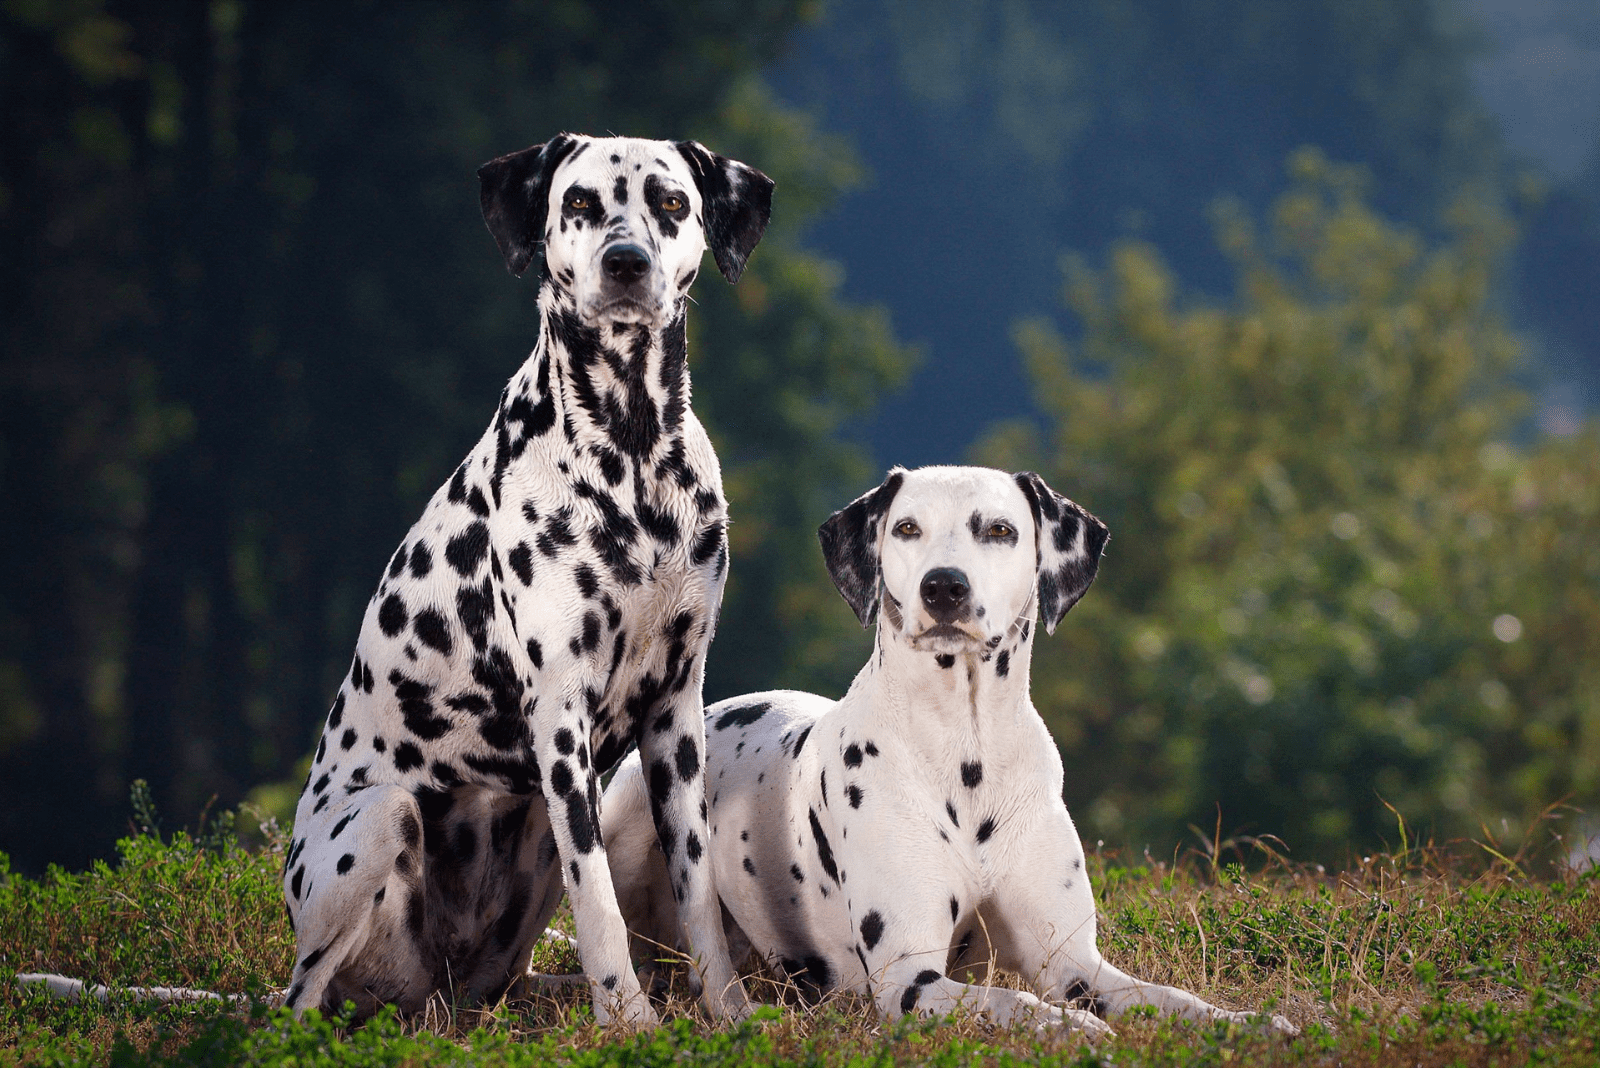 two dalmatians dogs sitting on the grass